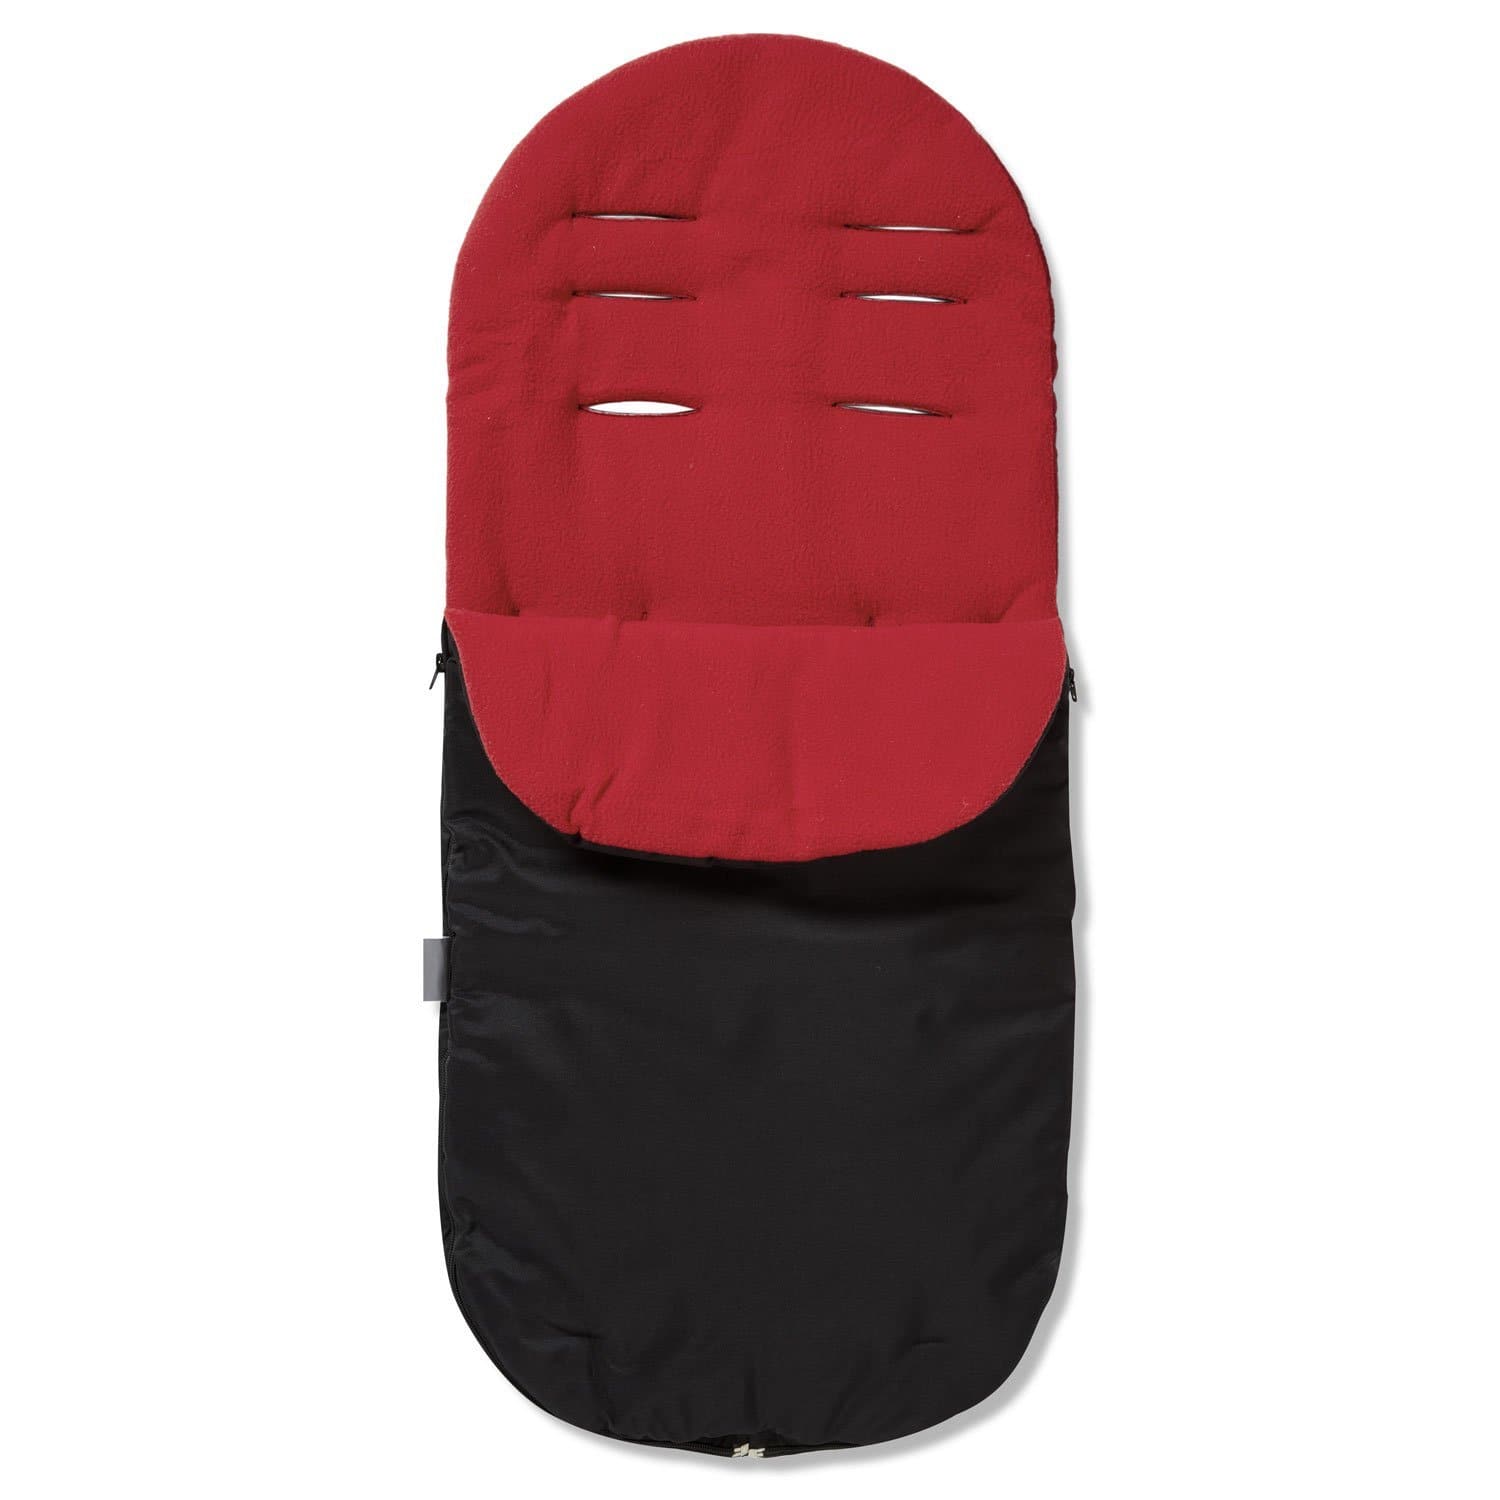 Footmuff / Cosy Toes Compatible with Maclaren - Red / Fits All Models | For Your Little One